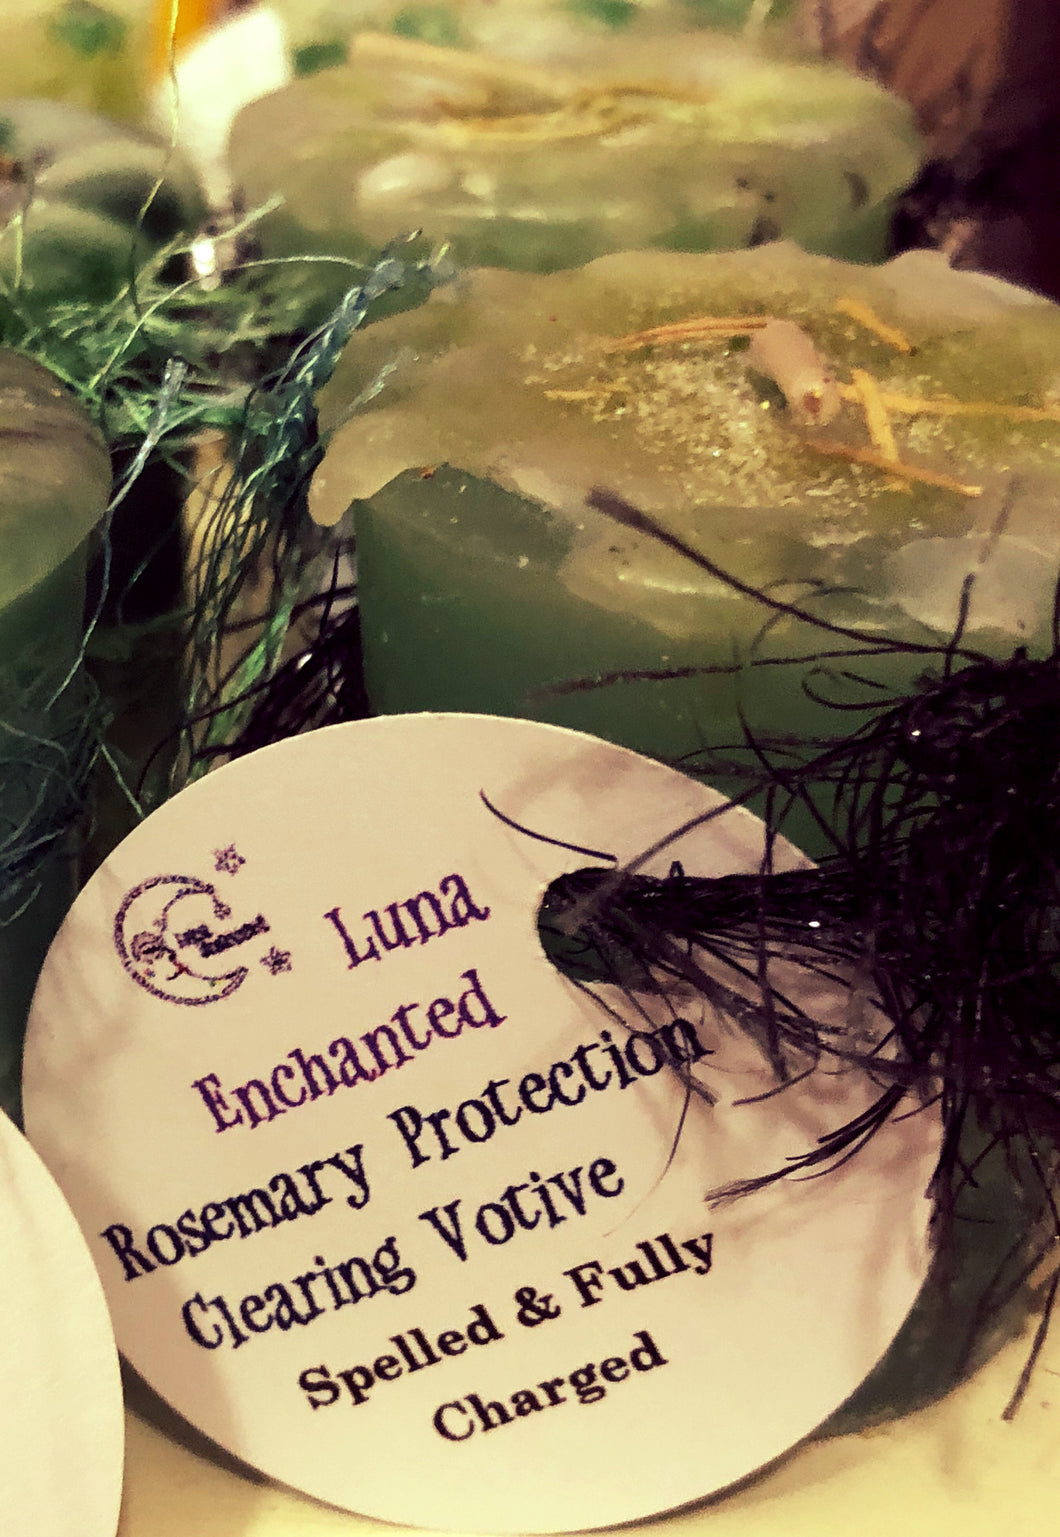 Rosemary Protection Votive Spell Candle